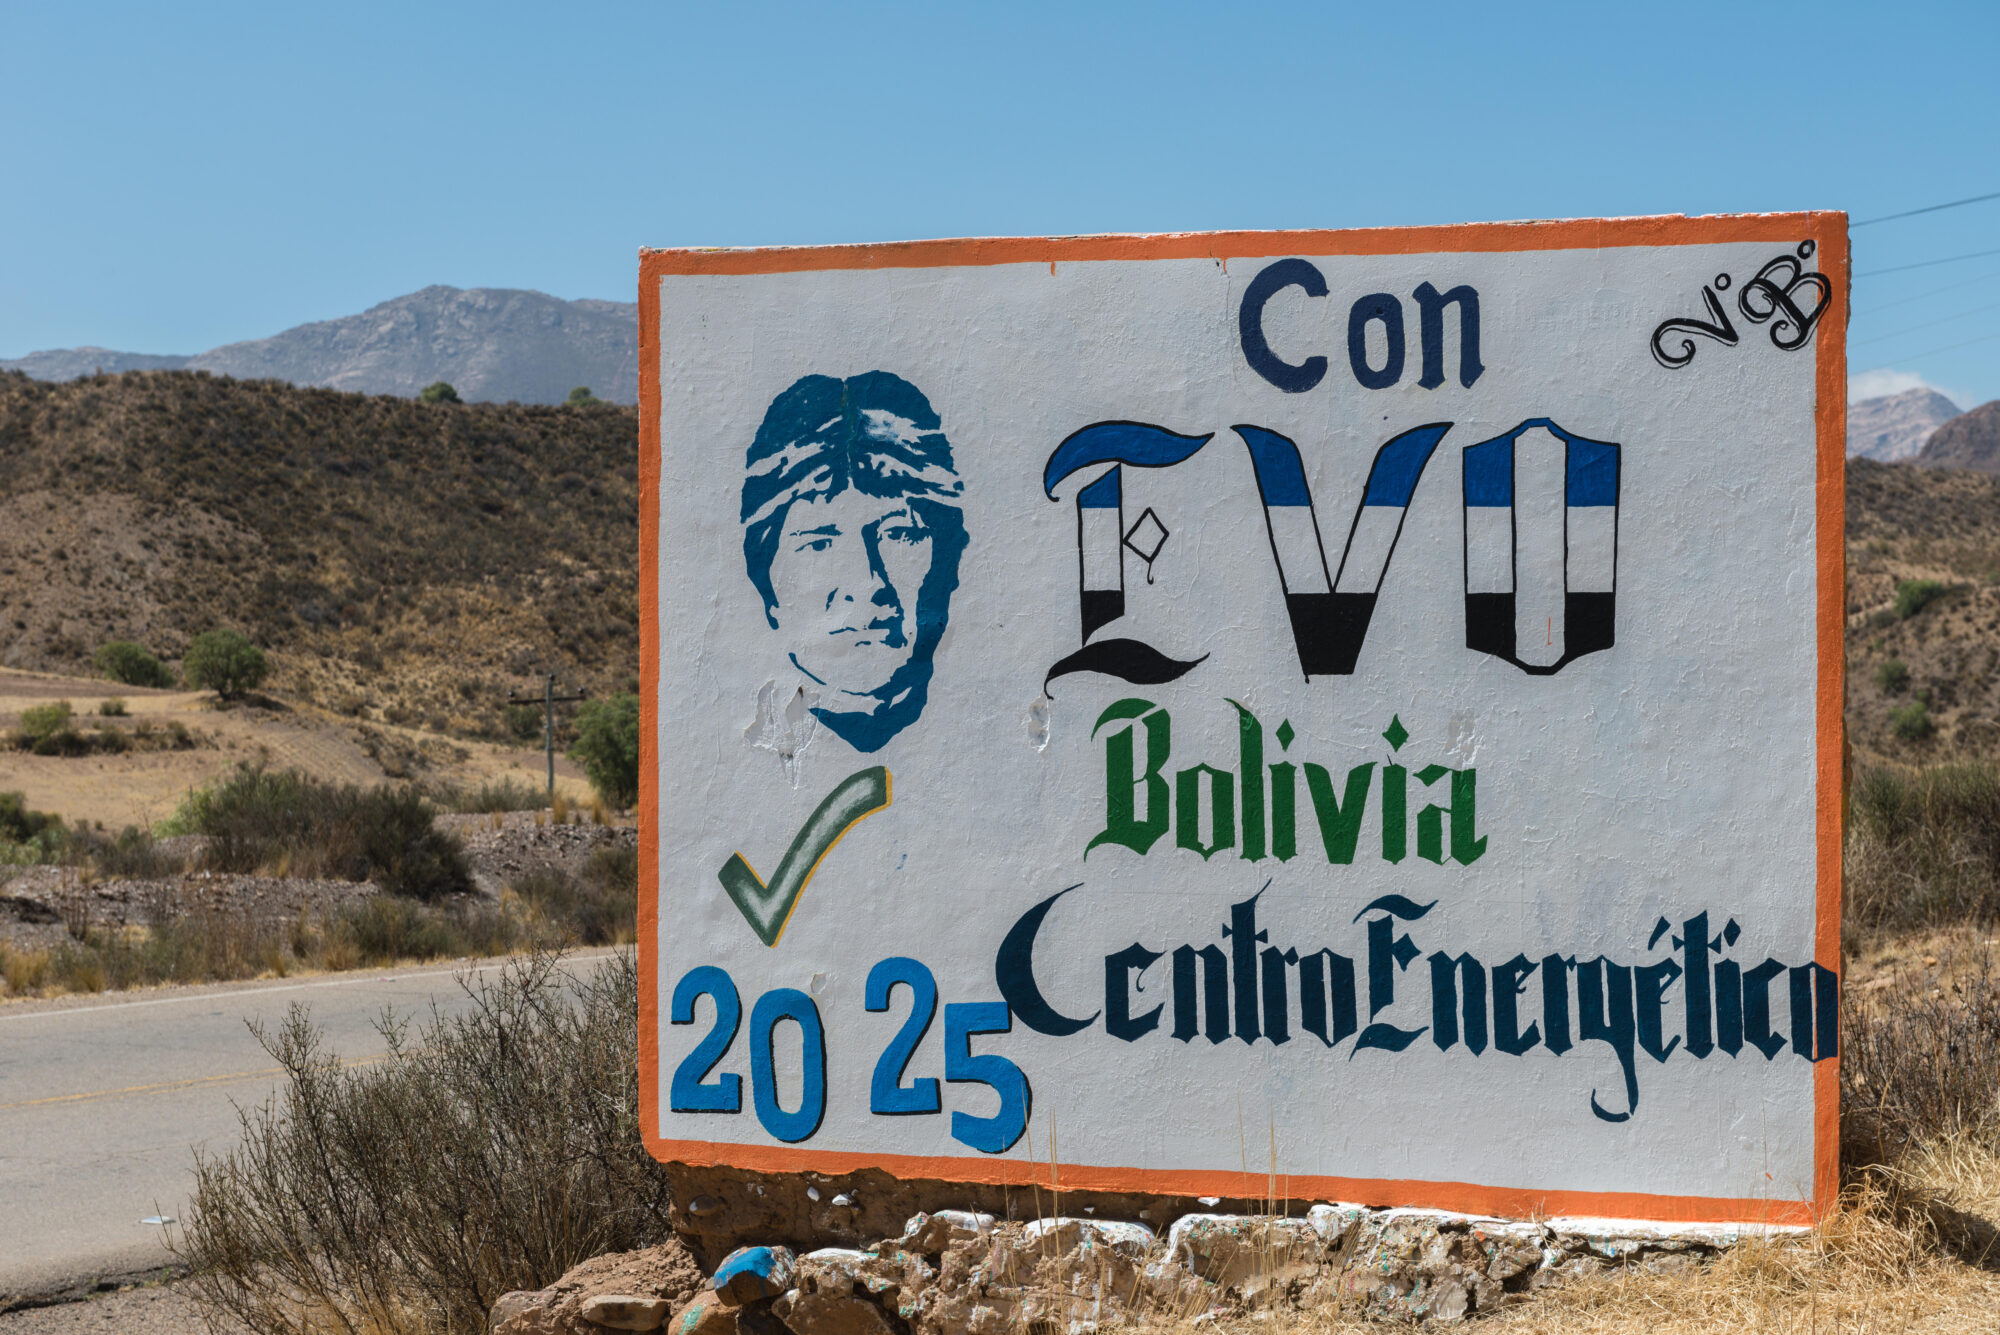 <p>Signs promote plans launched in 2014 by former president Evo Morales that aimed to turn Bolivia into an “energy centre”, upping its renewable capacity and selling surplus to regional neighbours – targets it may struggle to meet (Image: Wolgang Diederich / Alamy)</p>